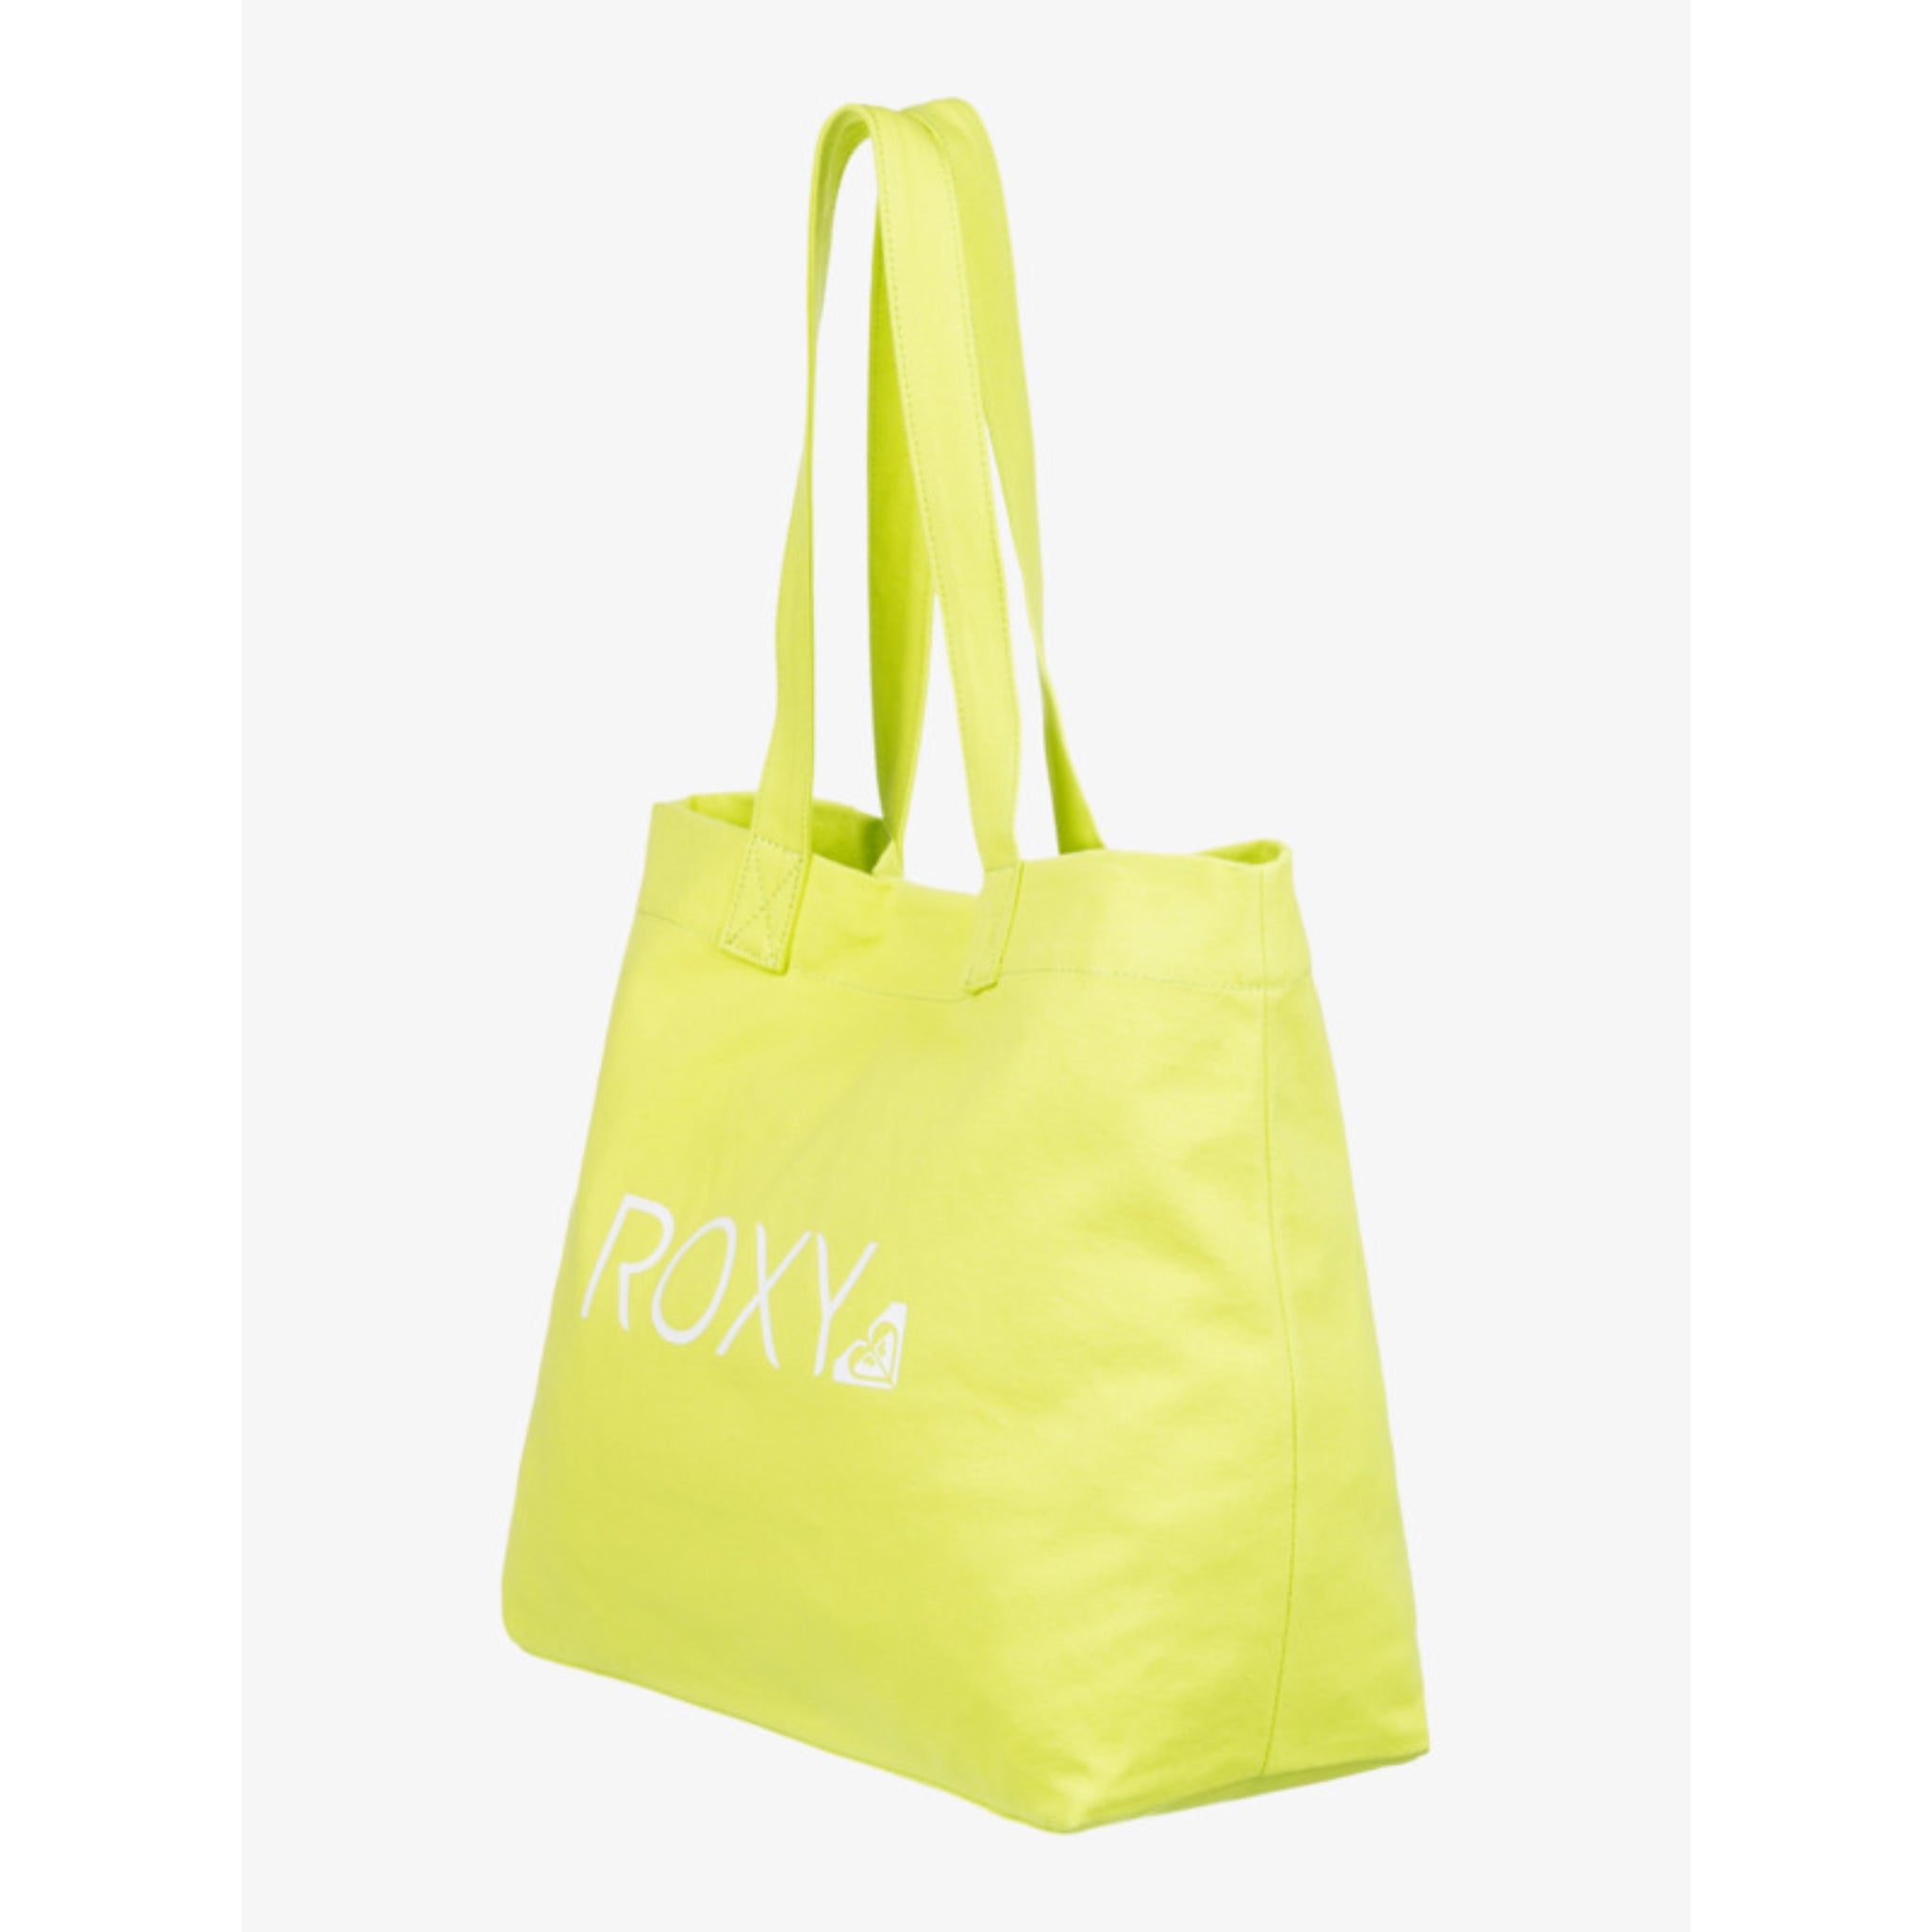 Roxy Go For It Tote Bag